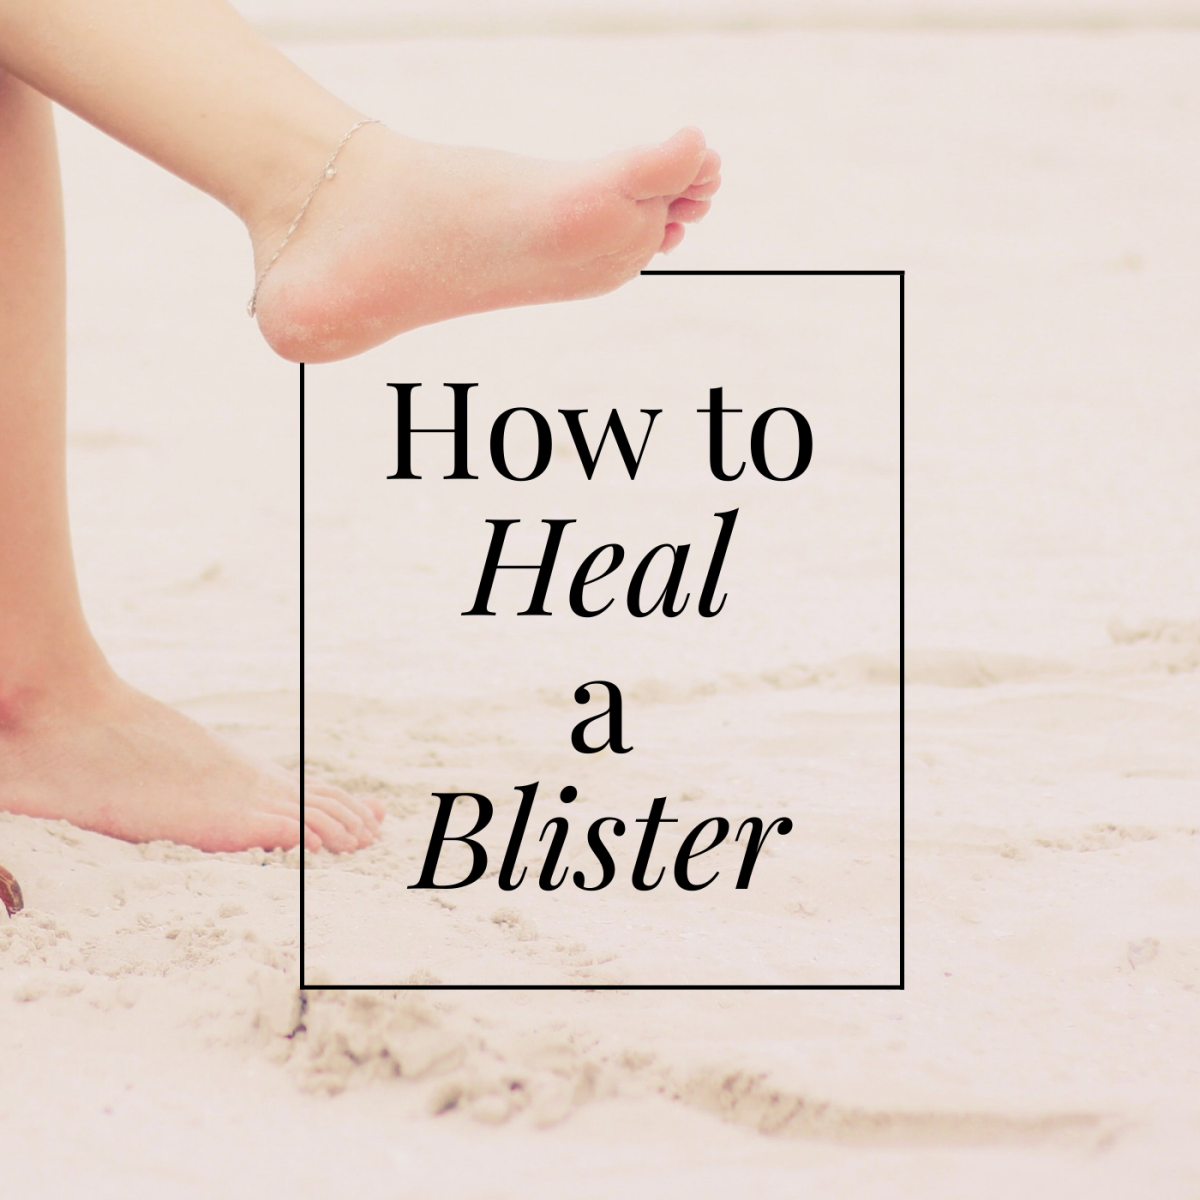 Tips and tricks for treating blister wounds. 